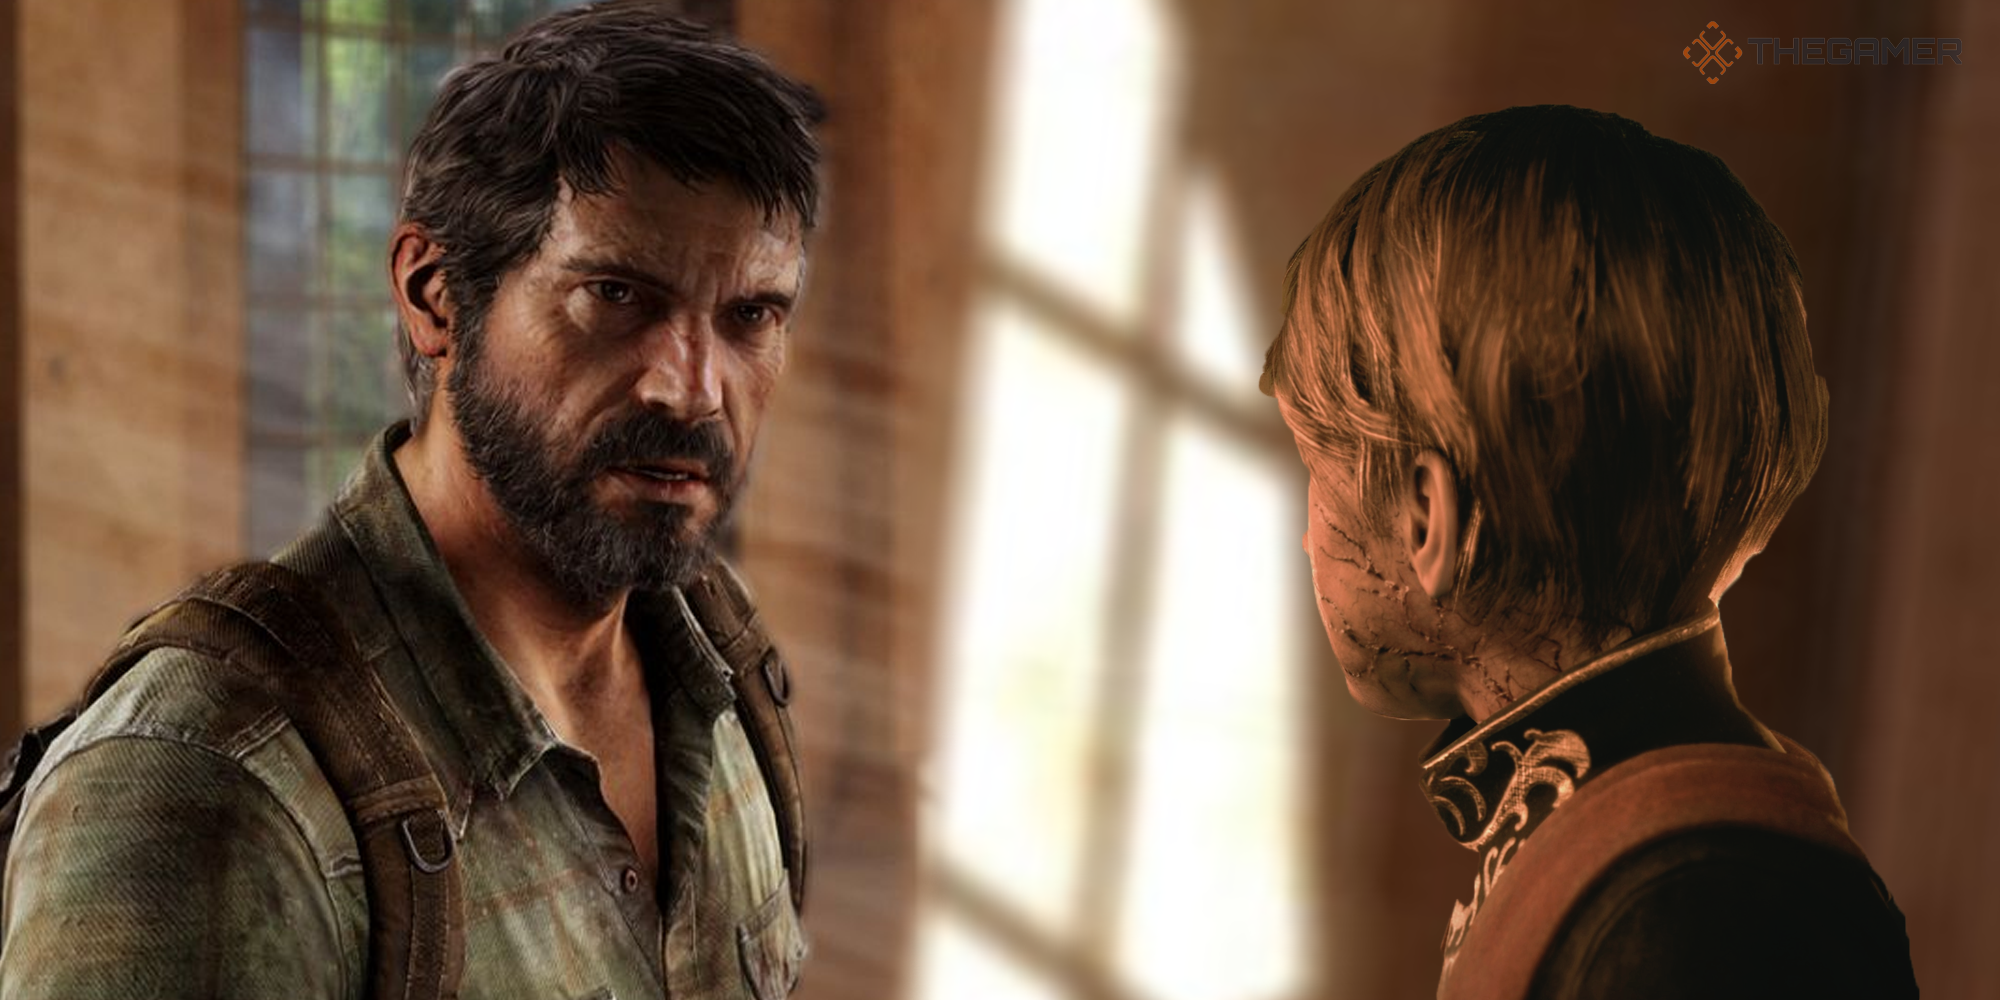 joel from the last of us looking at hugo from a plague tale innocence